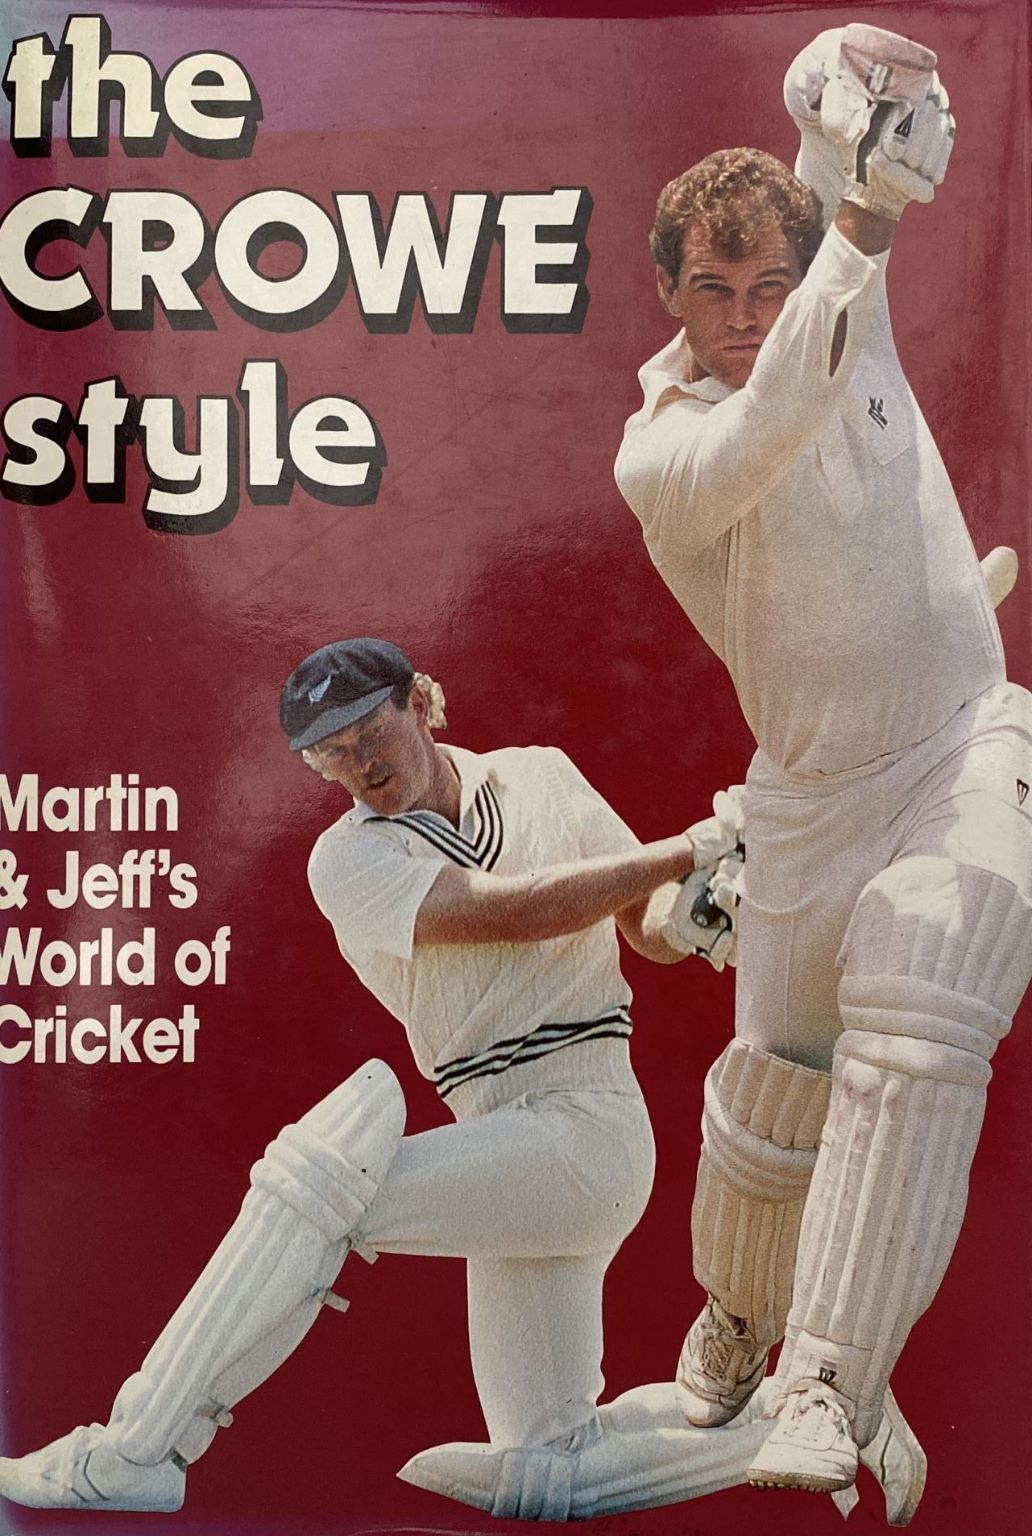 THE CROWE STYLE: Martin & Jeff's World of Cricket